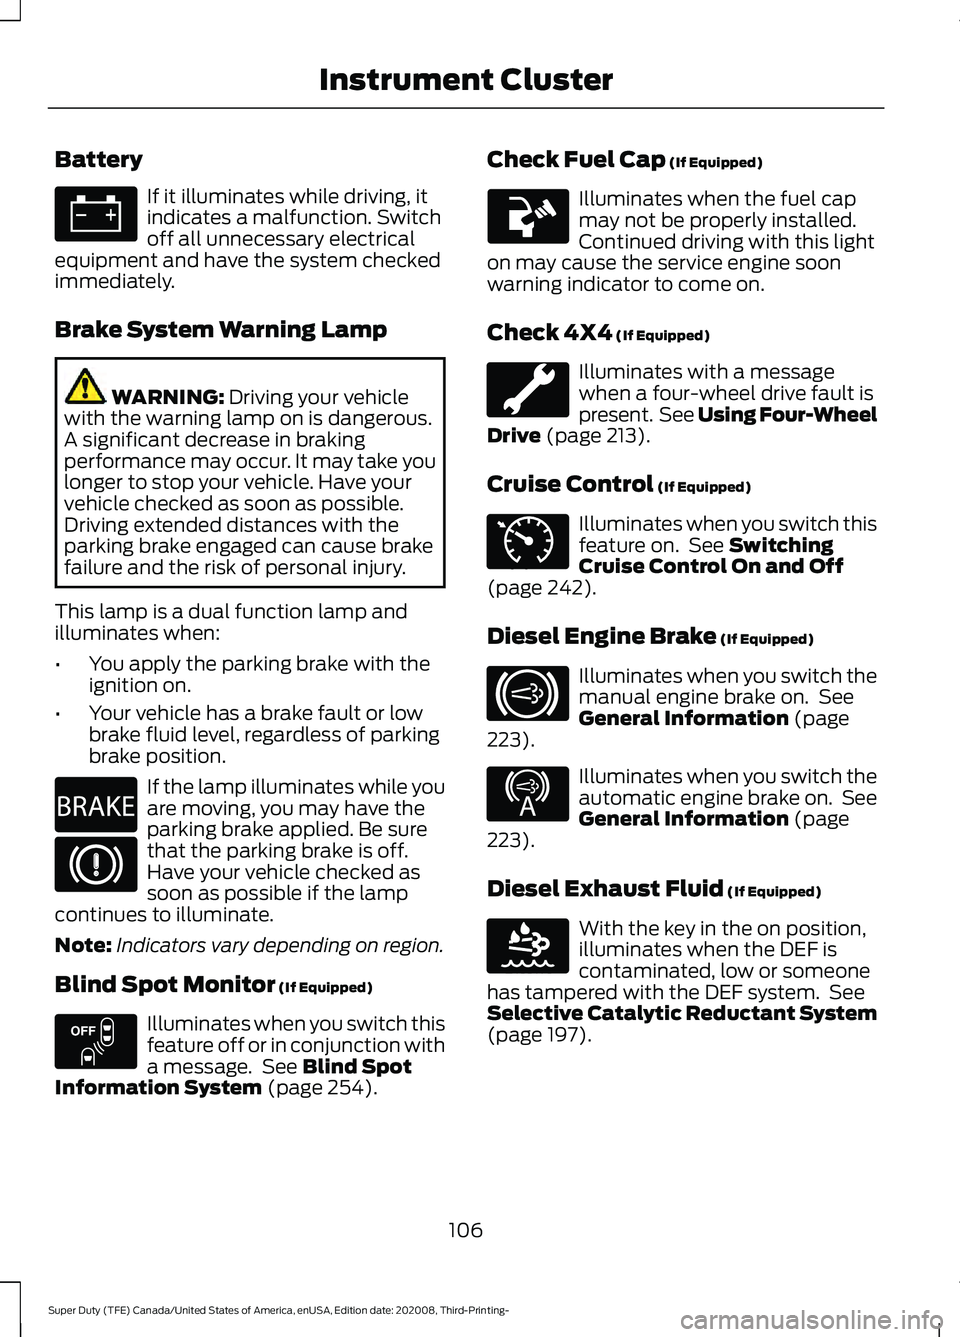 FORD F-450 2021  Owners Manual Battery
If it illuminates while driving, it
indicates a malfunction. Switch
off all unnecessary electrical
equipment and have the system checked
immediately.
Brake System Warning Lamp WARNING: Driving